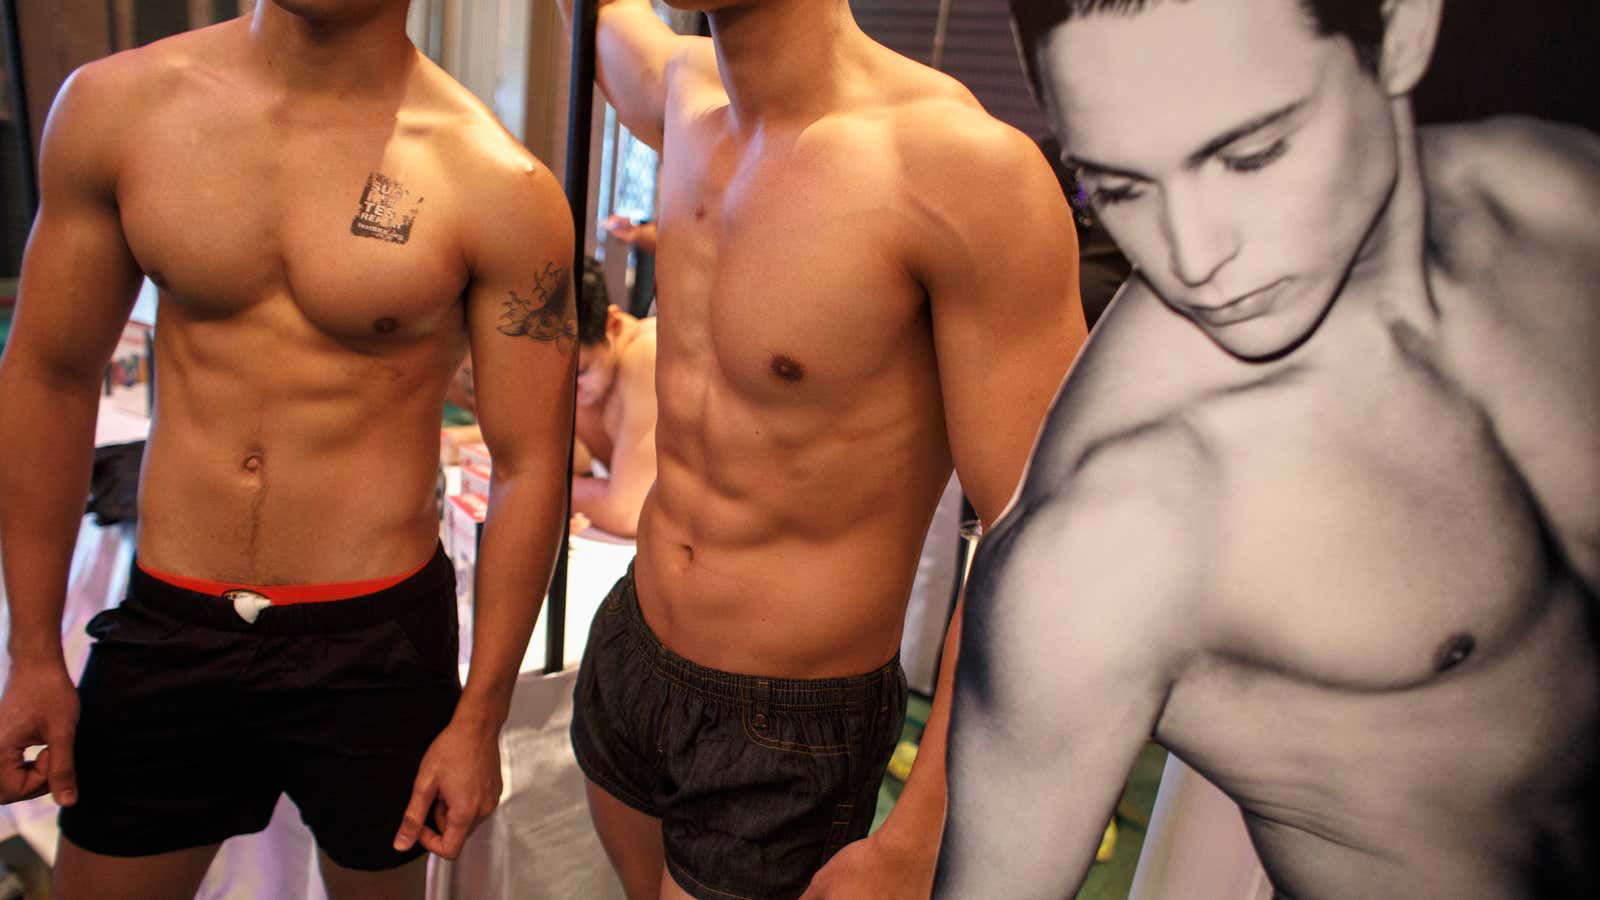 Is this really the only way Asian men can be hot?